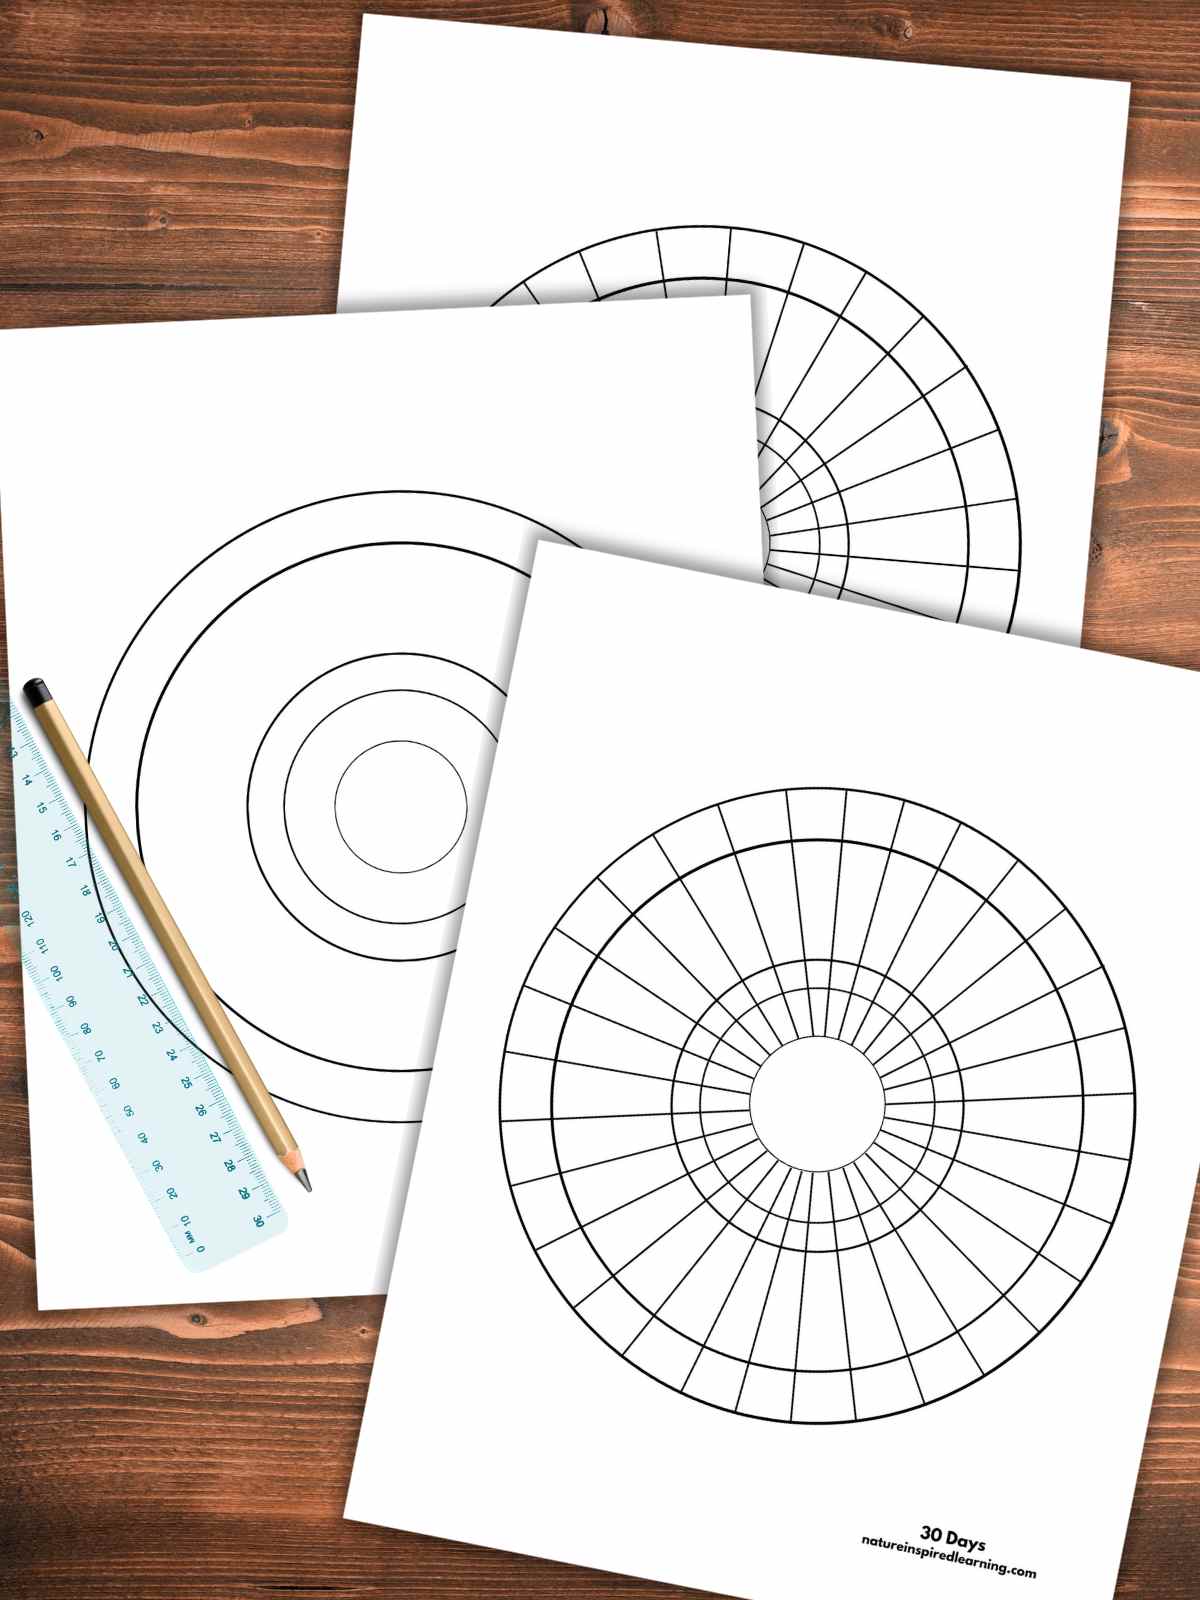 three overlapping calendars in circle form two with lines one without lines with a clear ruler and a pencil on top with a wooden background.